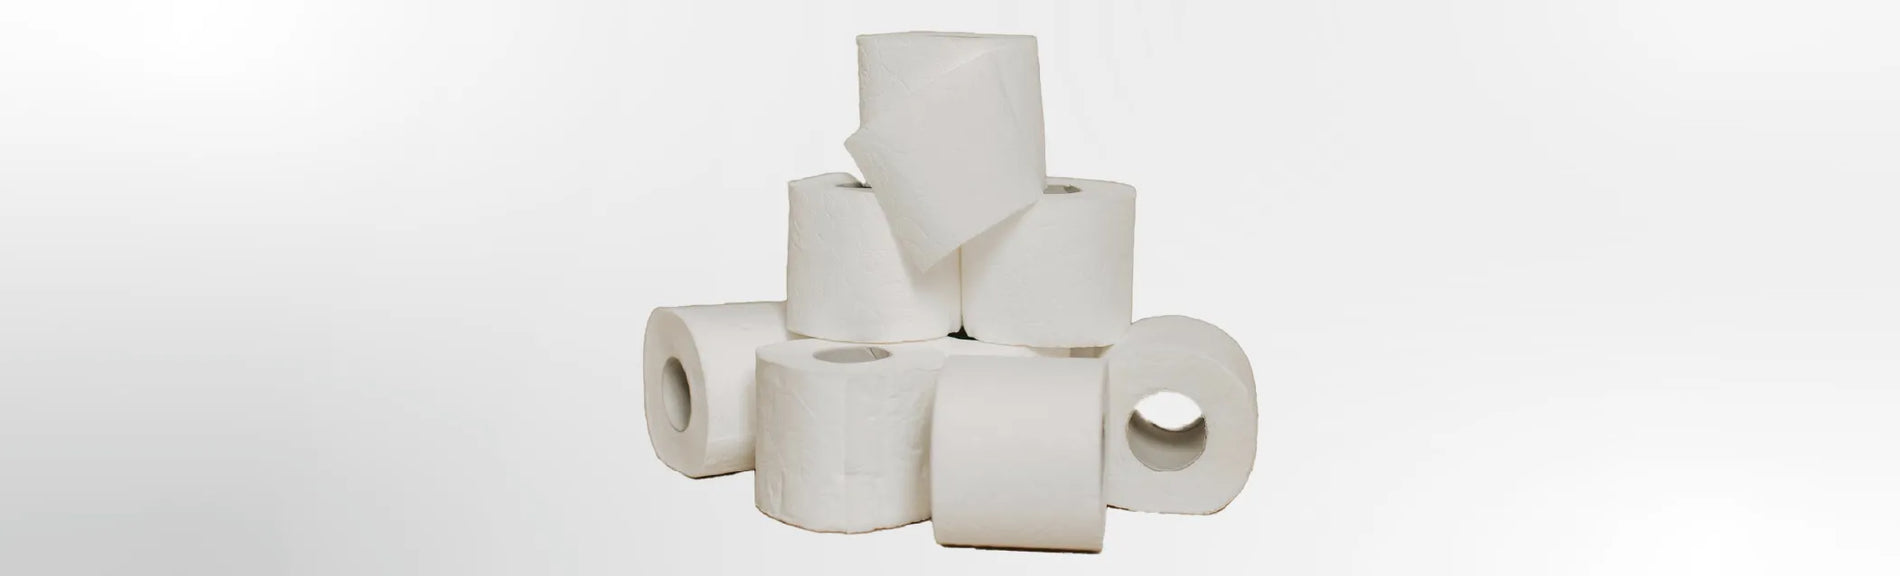 Maximizing Hygiene in High Traffic Areas: A Guide to Industrial Paper Towels